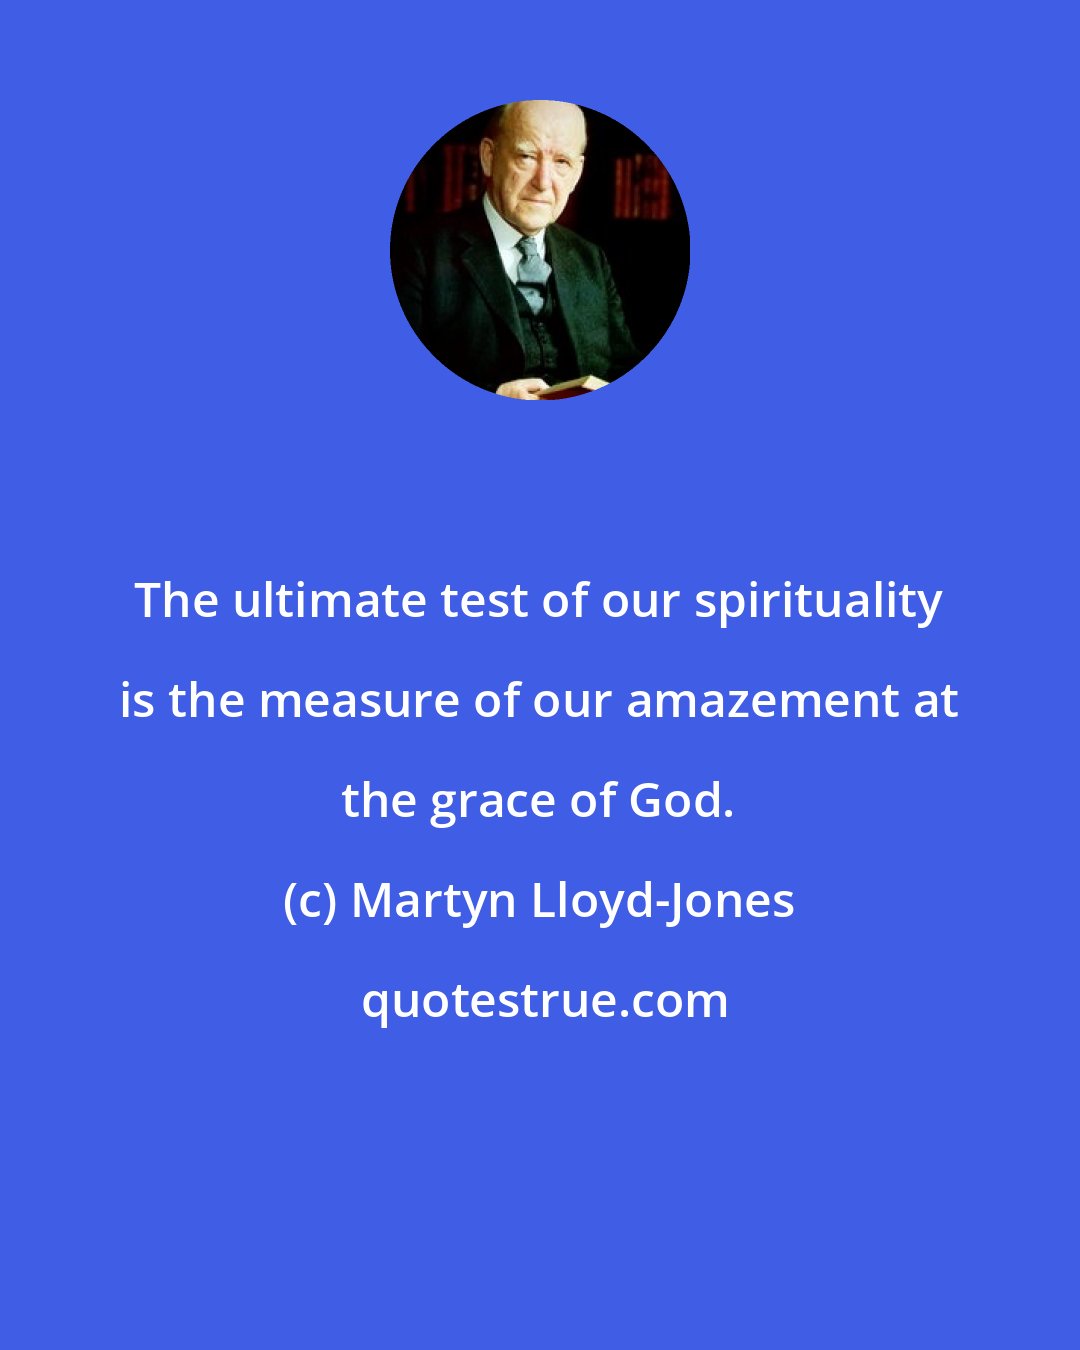 Martyn Lloyd-Jones: The ultimate test of our spirituality is the measure of our amazement at the grace of God.